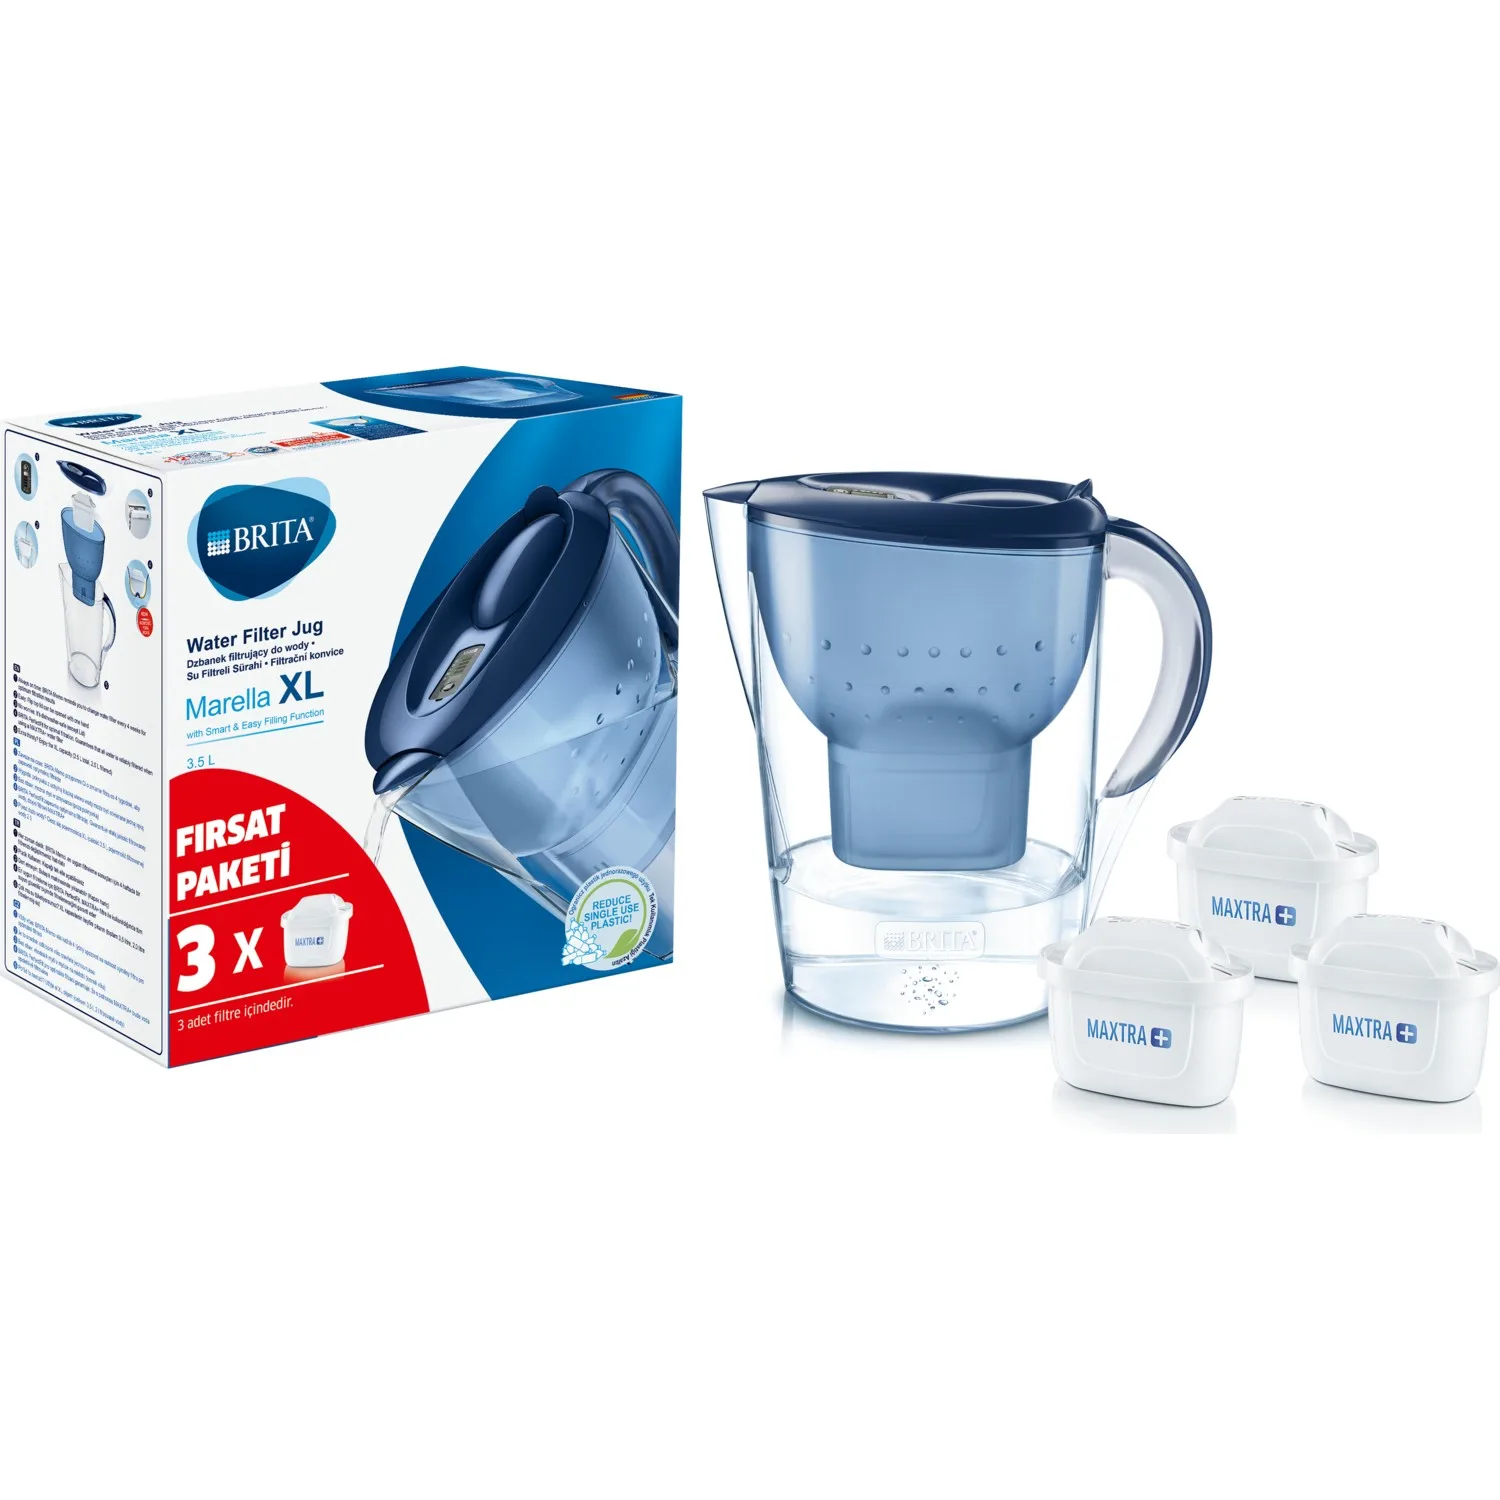 Original BRITA Marella 3.5 Lt fridge water filter jug with 3 x  MAXTRA+filter for reduction of chlorine, limescale and impurities -  AliExpress